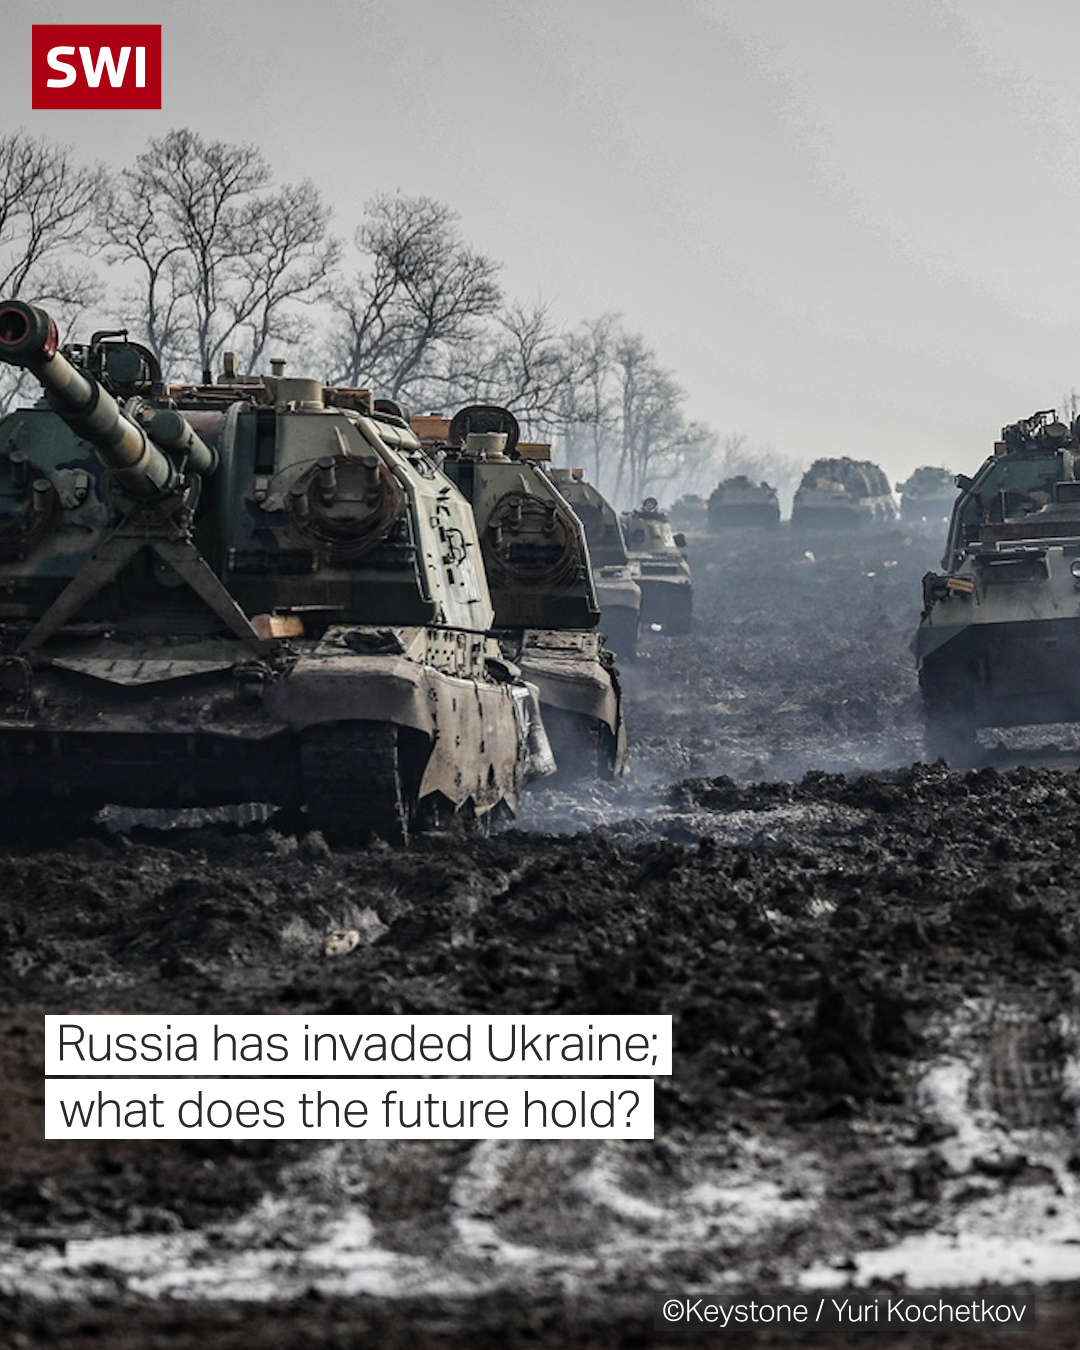 Tanks driving through mud in Ukraine. Text banner reading Russia has invaded Ukraine. What does the future hold?